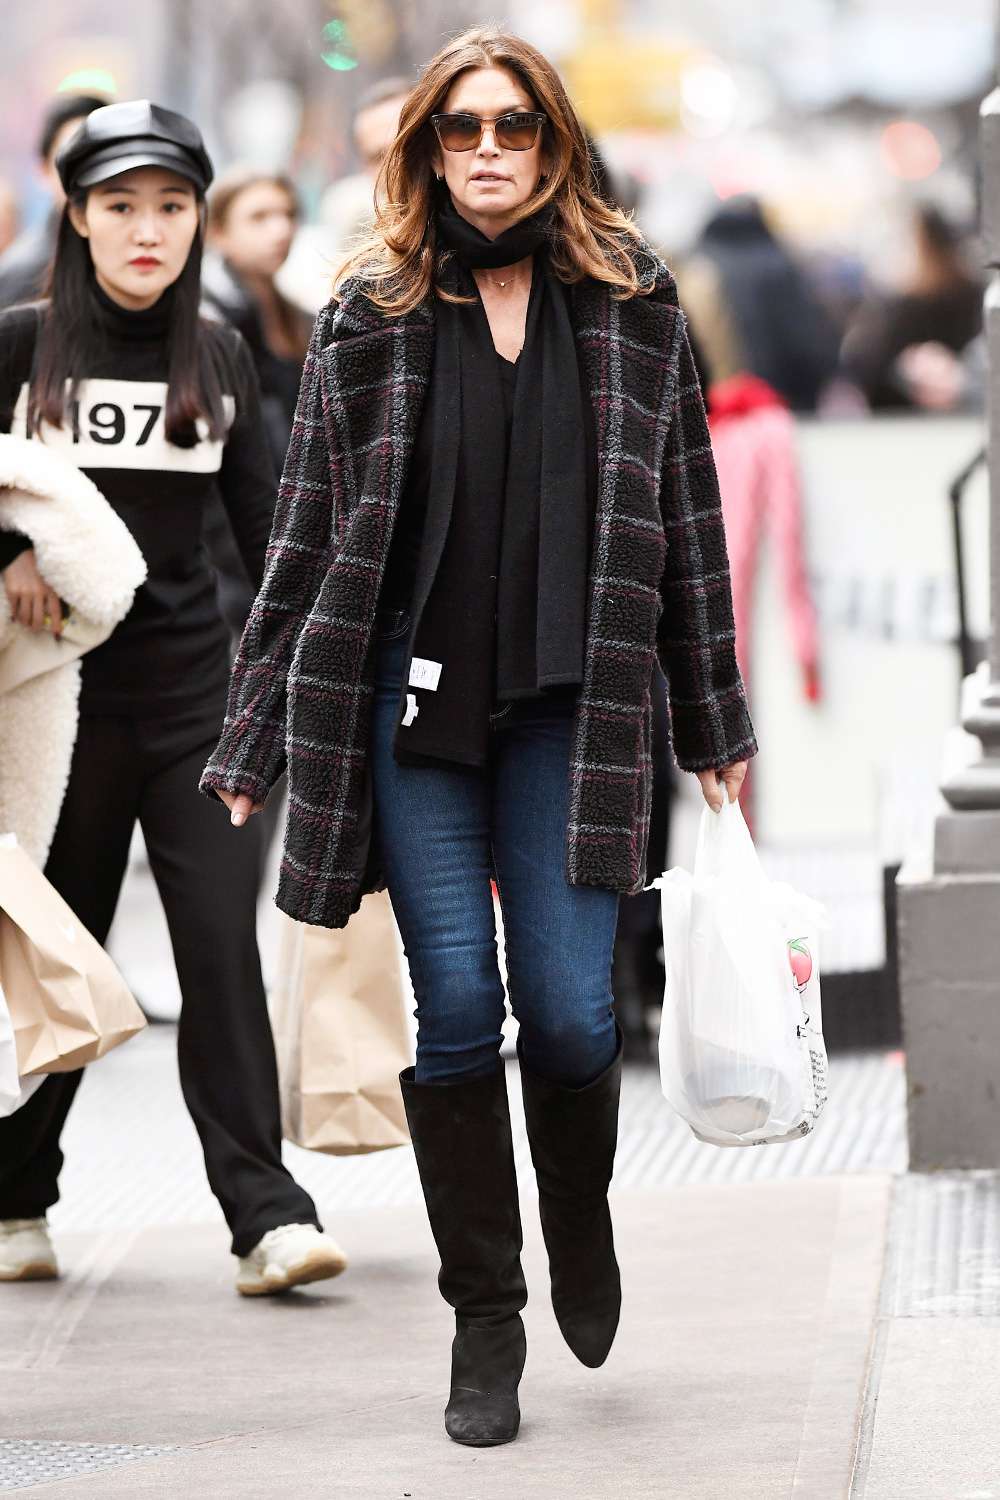 Cindy Crawford spotted getting her lunch at a local Deli Super Market in the Soho Section of New York City